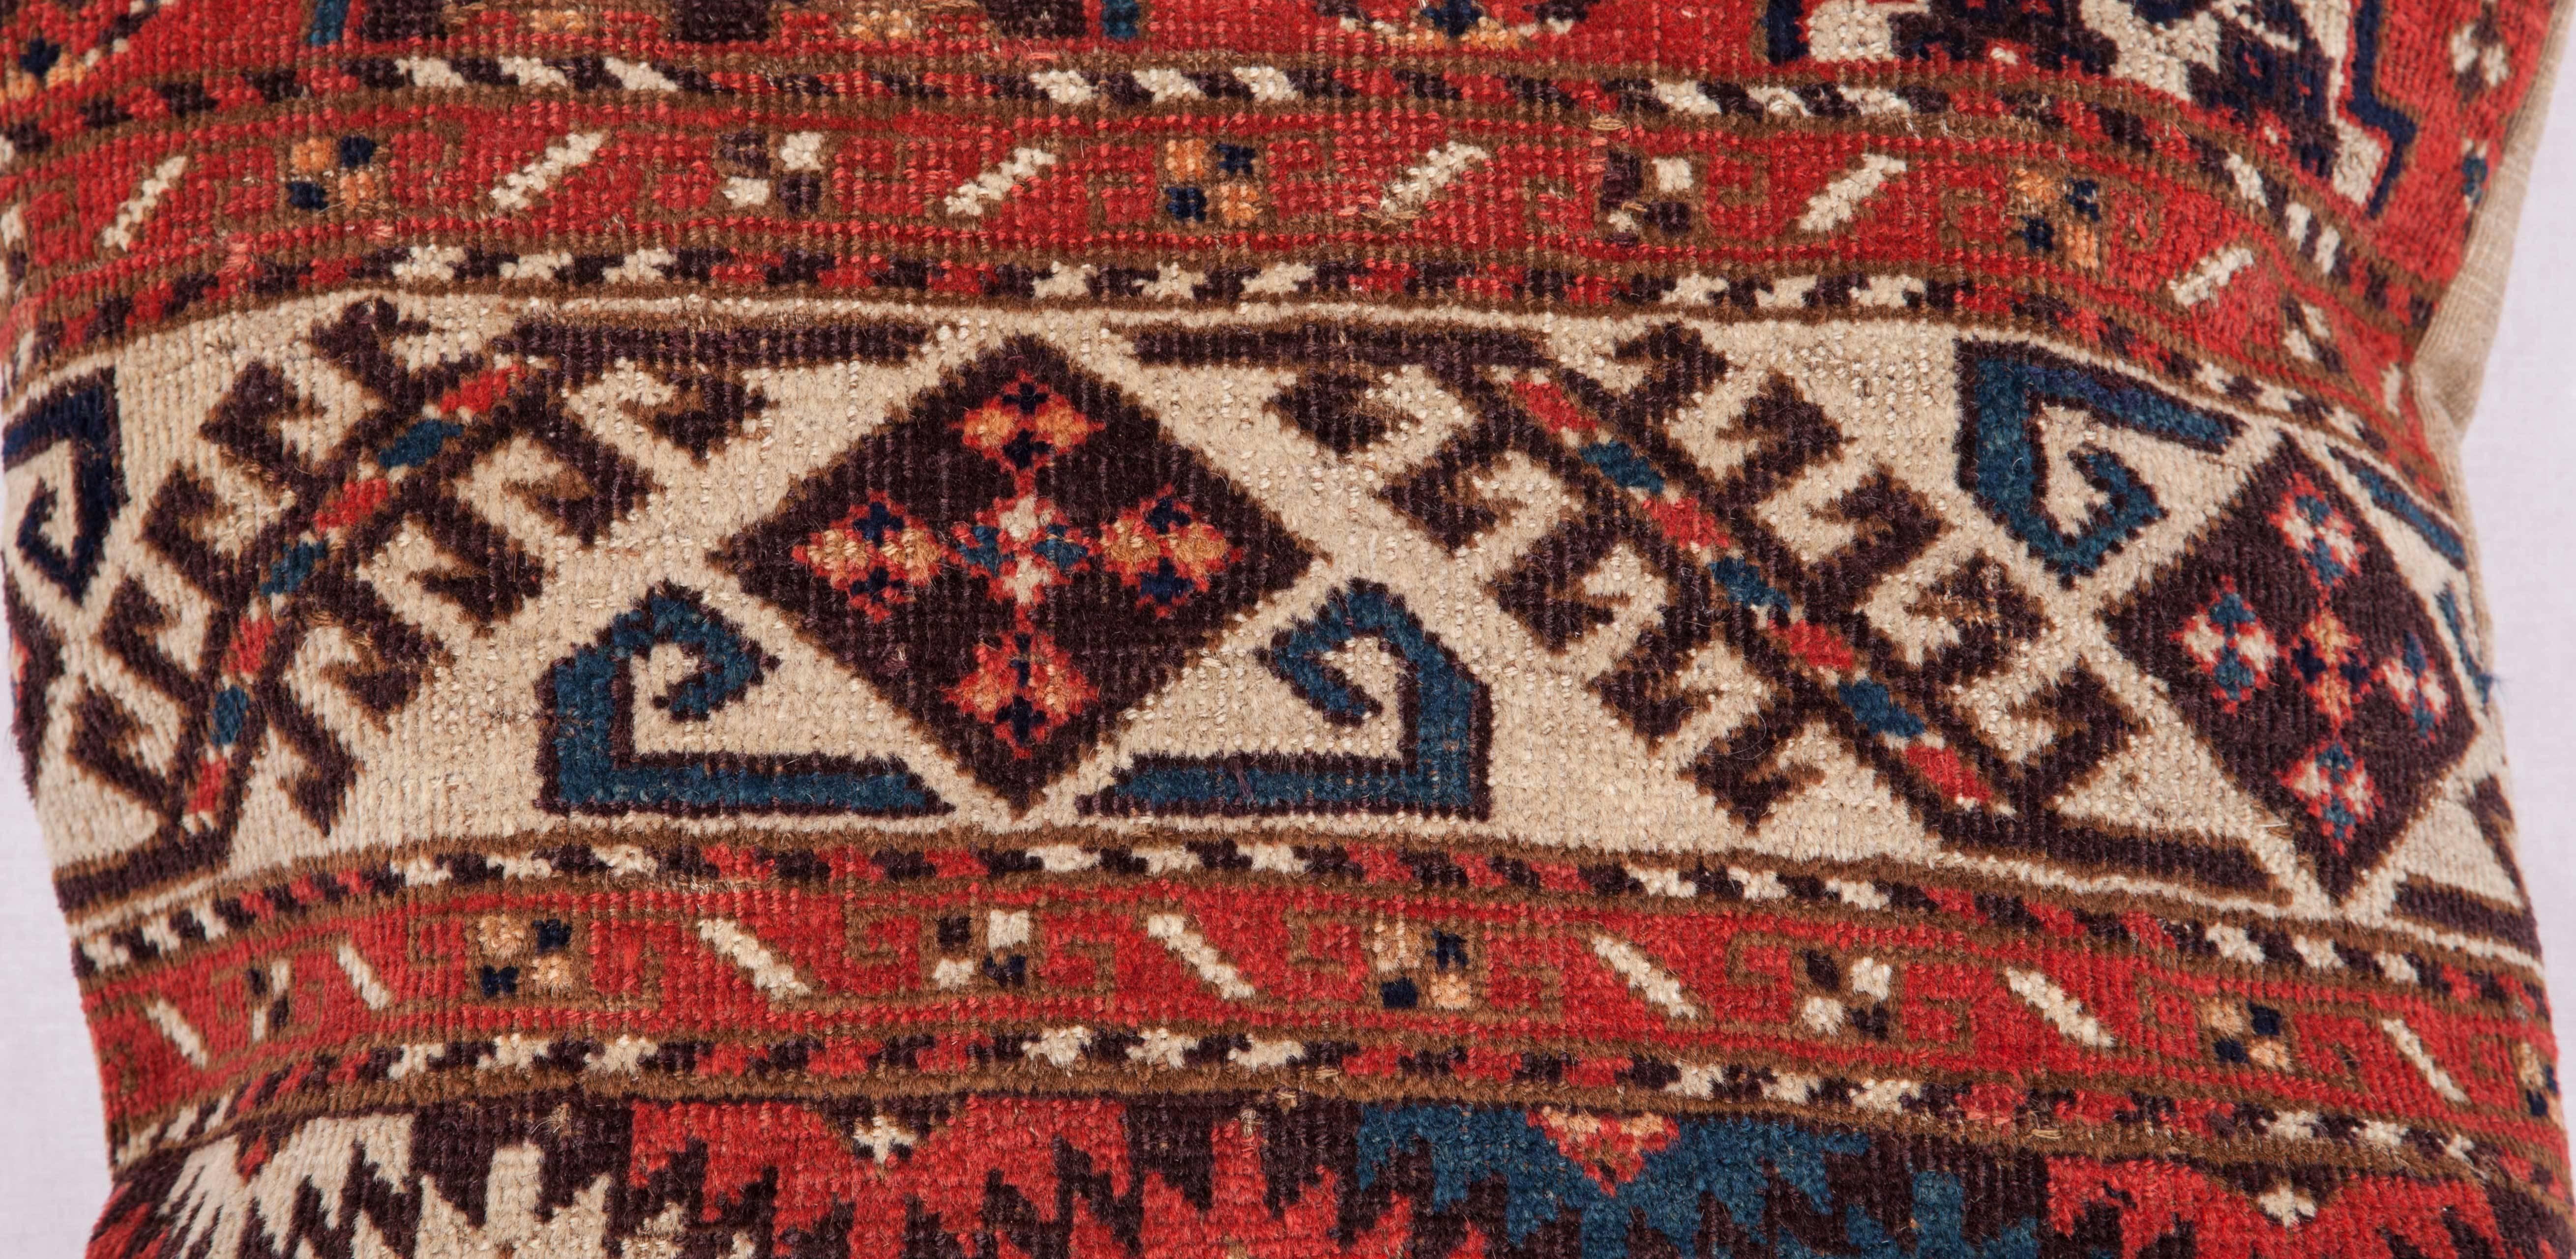 Tribal Pillows Made Out of a 19th Century Turkmen Chodor Tribe Main Rug Fragment